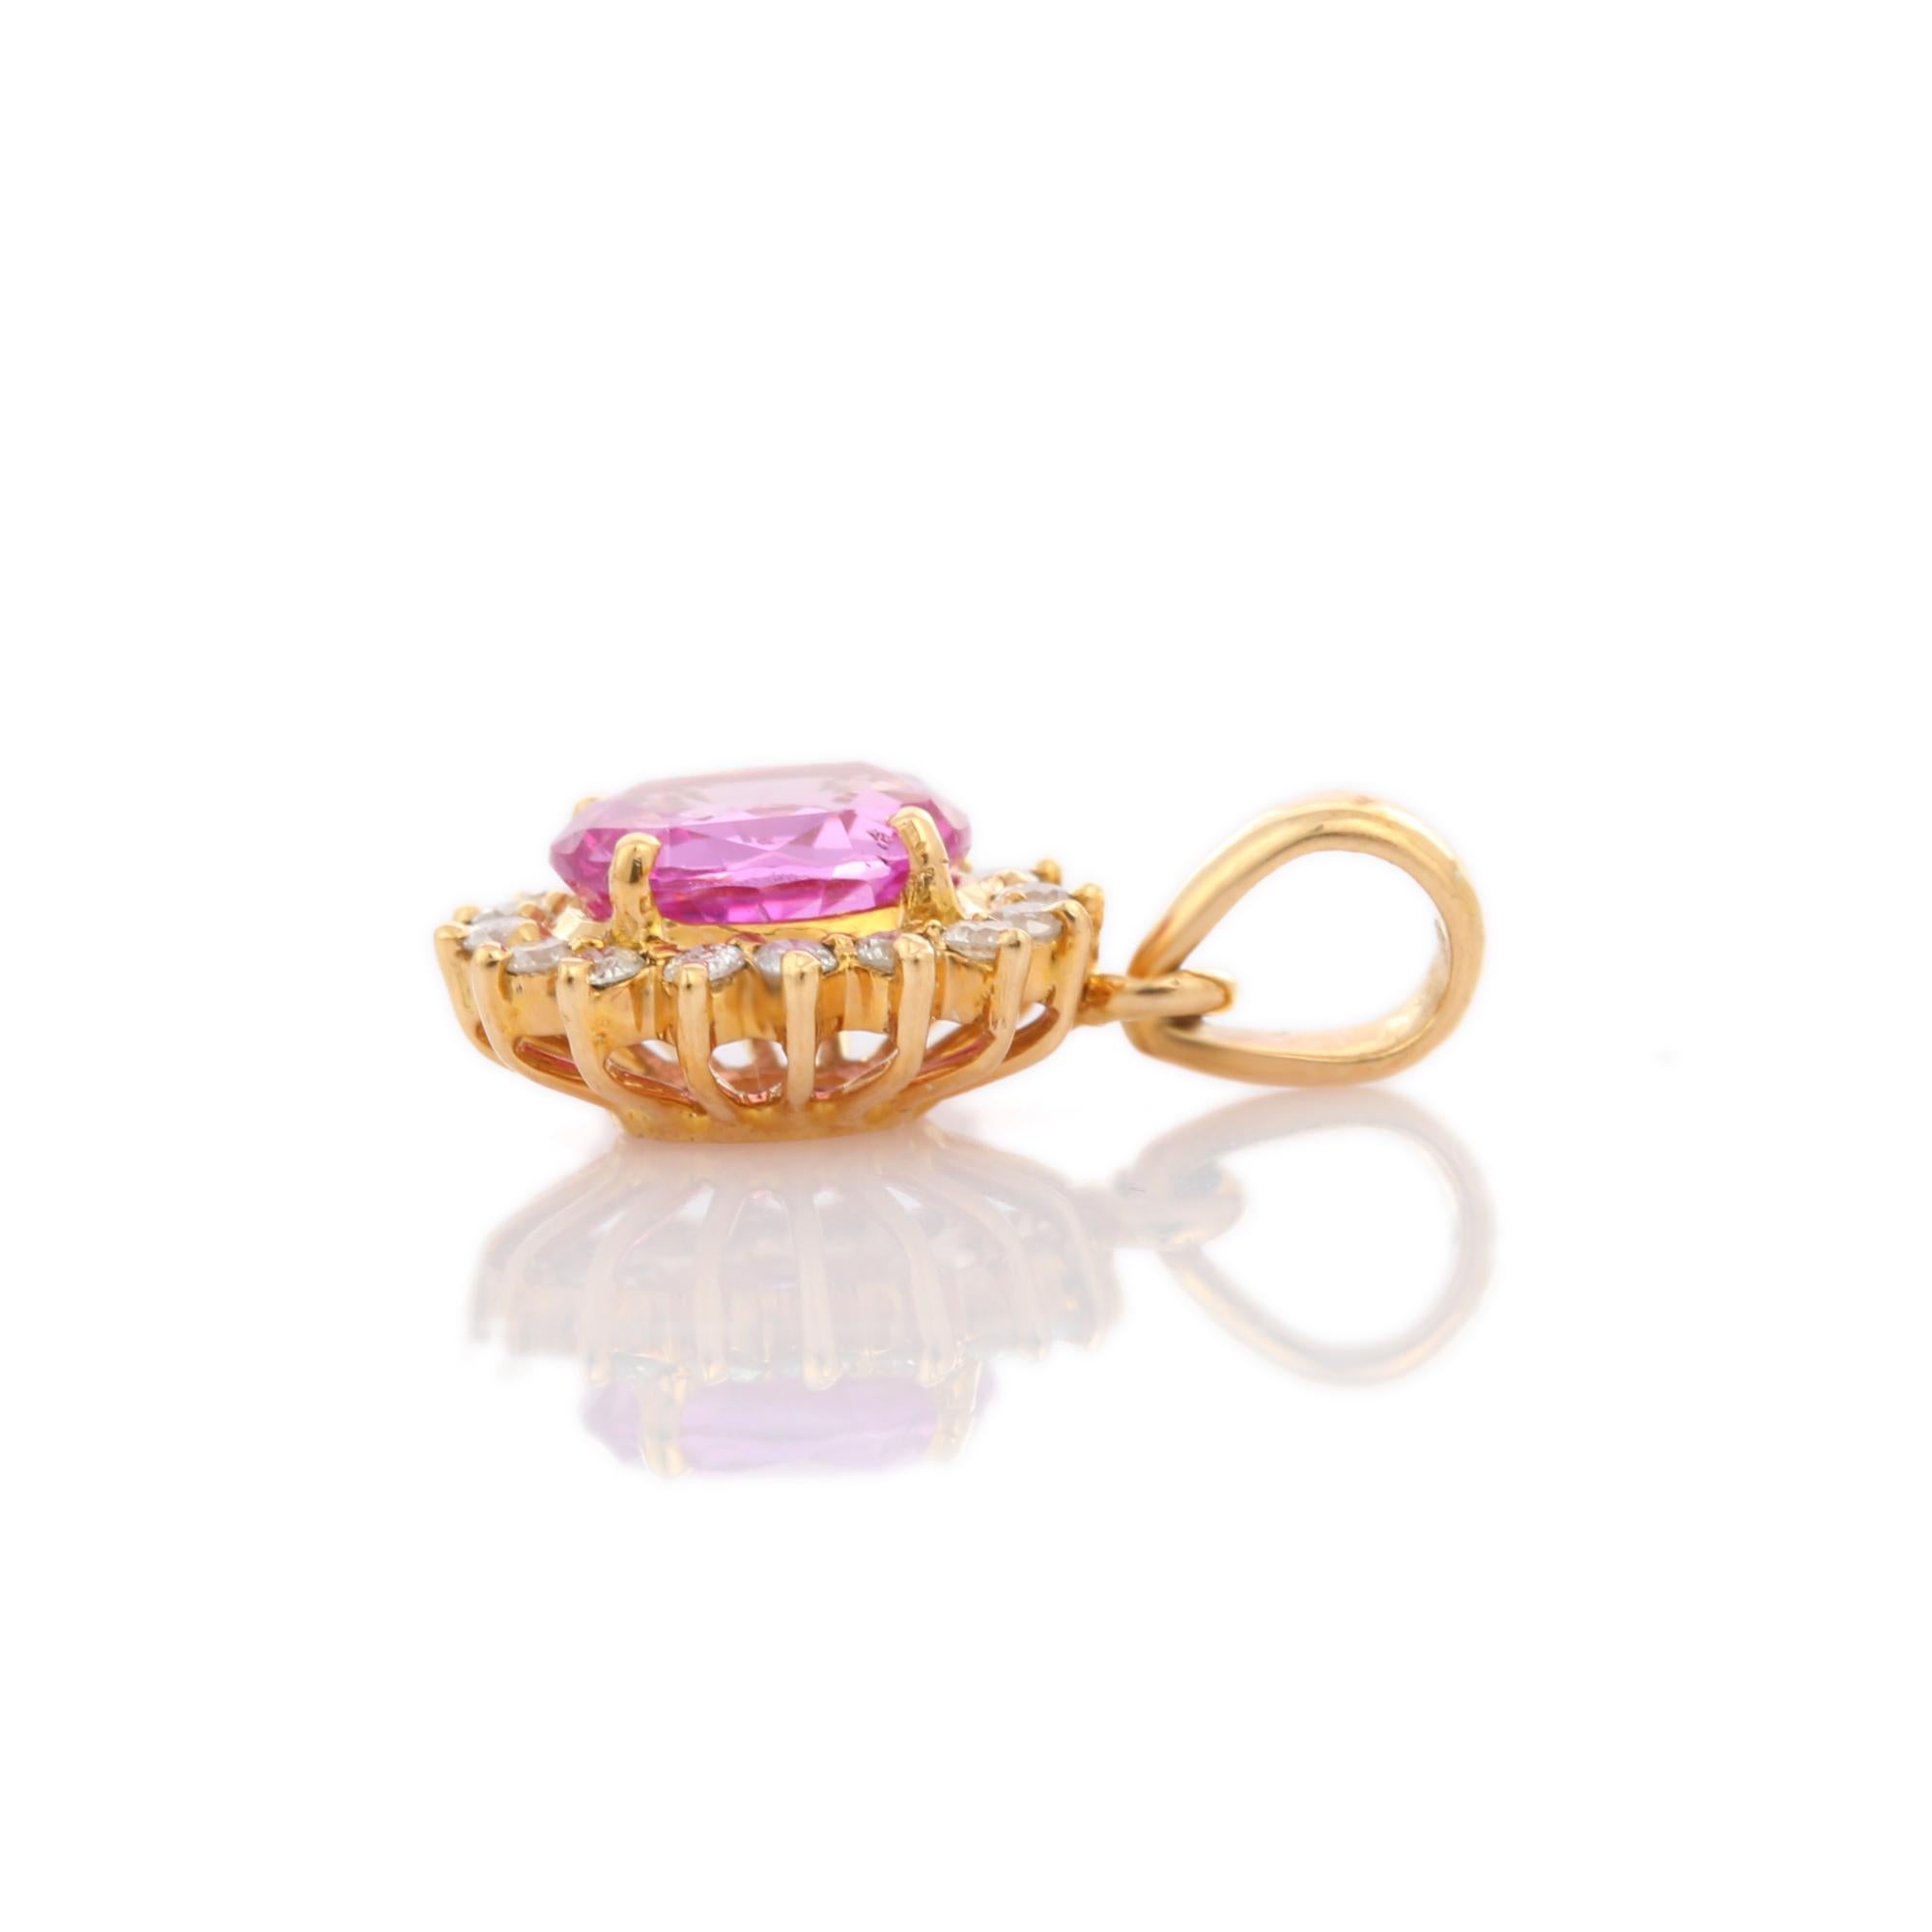 Oval Cut 1.68 ct Pink Sapphire with Diamonds Wedding Pendant Studded in 18K Yellow Gold For Sale